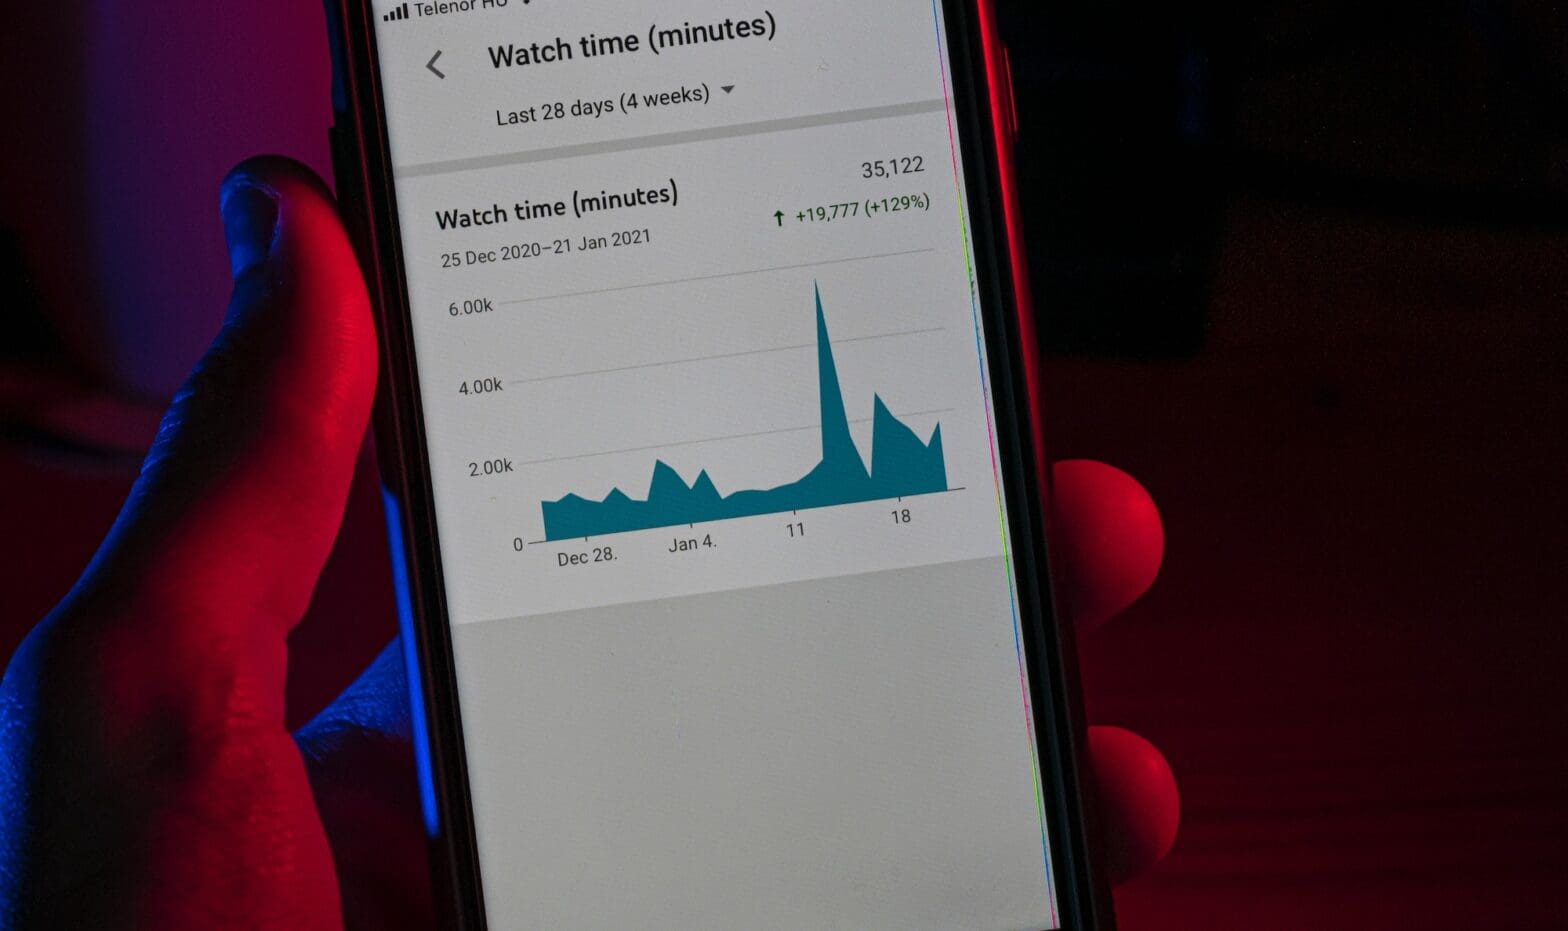 A person's hand holding a smartphone displaying a YouTube analytics graph, highlighting a significant spike in watch time, a key metric used by the YouTube algorithm to gauge video performance. The screen shows a detailed view of watch time minutes over the last 28 days, reflecting the content's impact on the YouTube algorithm.